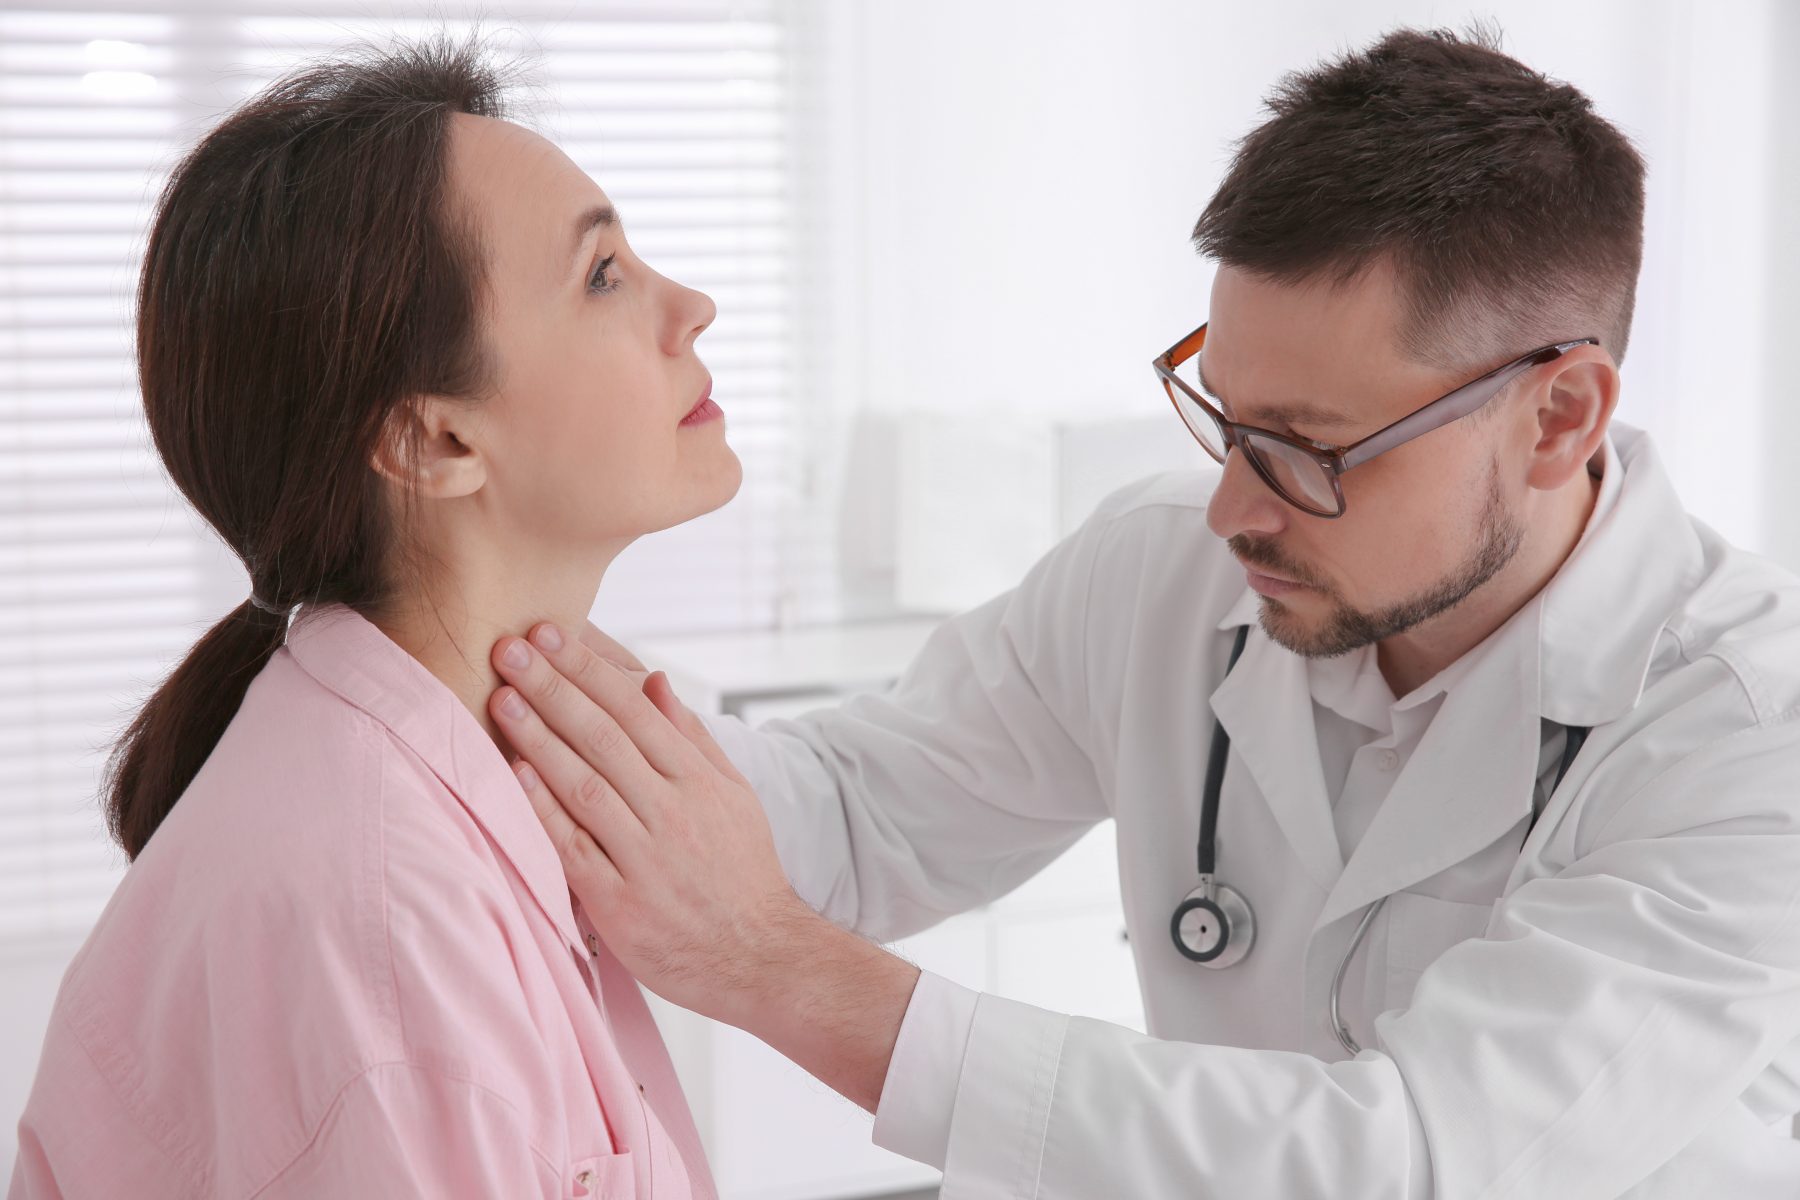 Doctor investigating hypothyroidism by examining thyroid gland of patient